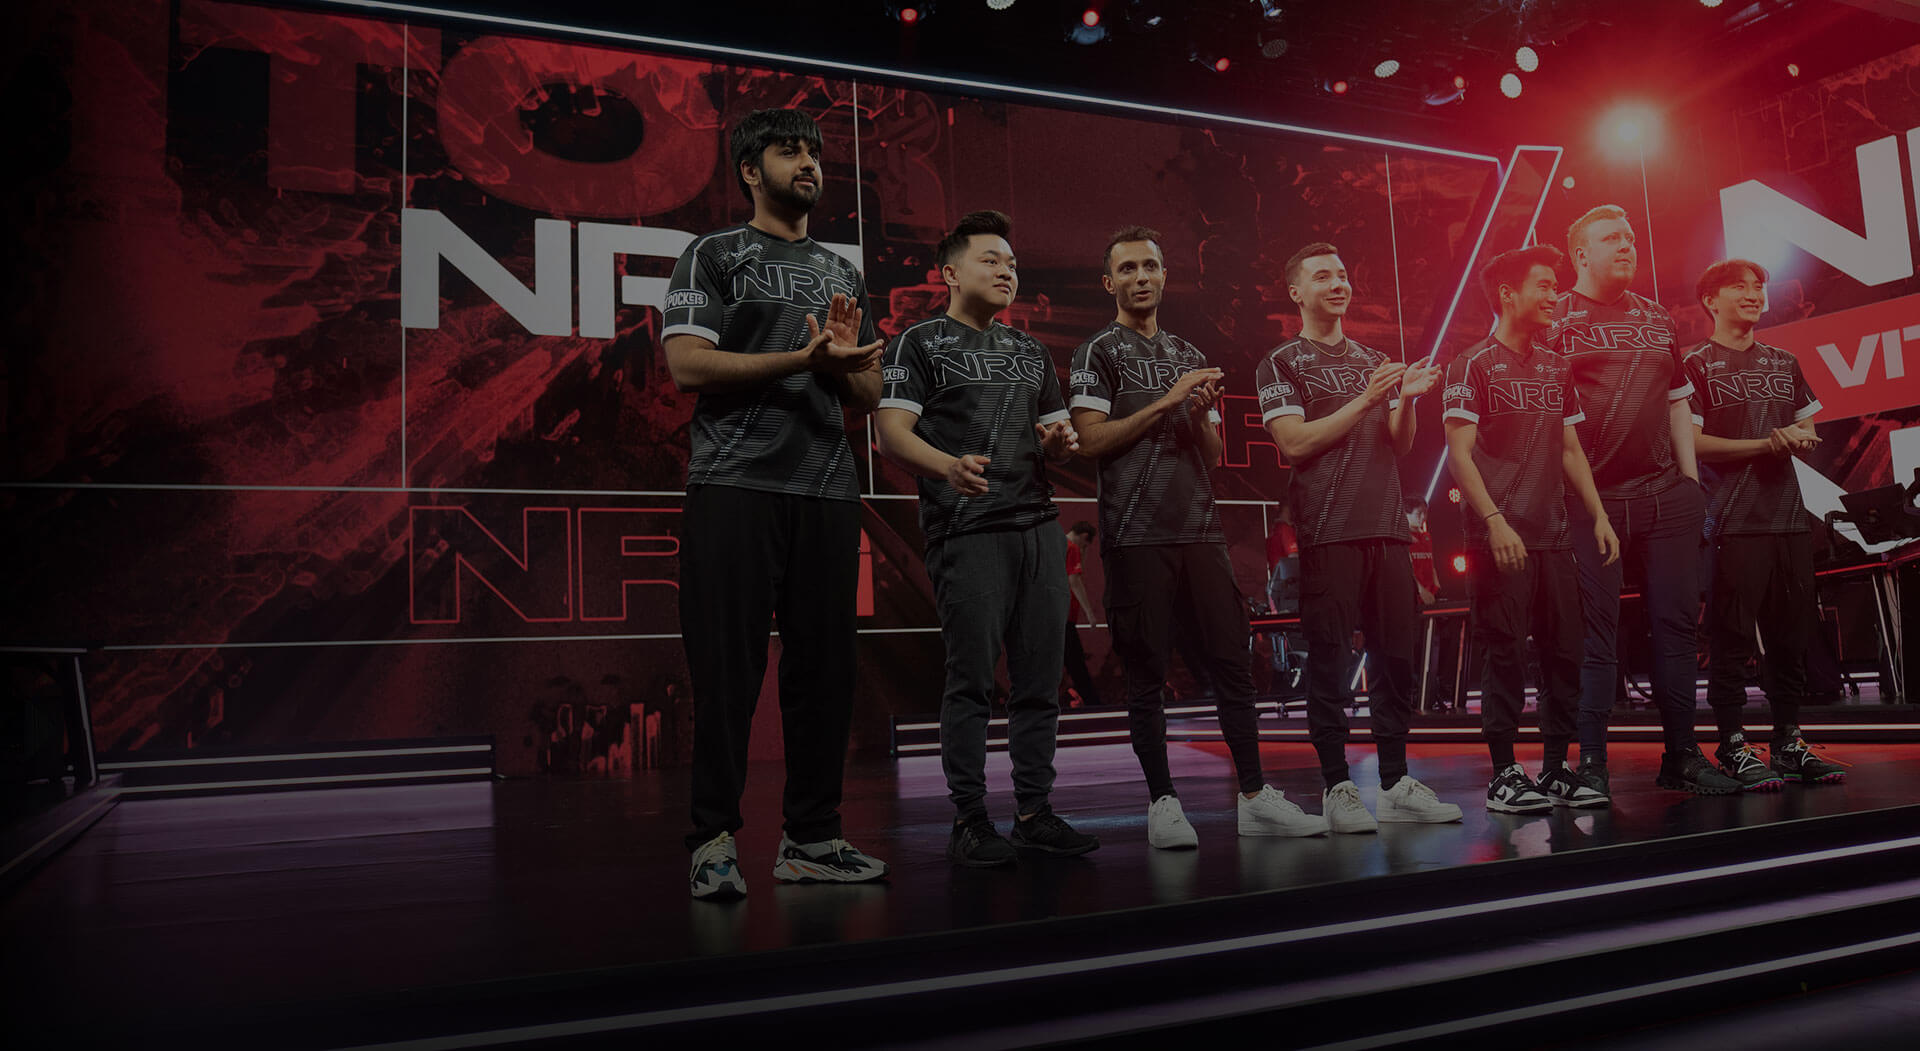 NRG Valorant Team on a stage, having just won a game. ROG is the official peripherals sponsor for NRG Esports